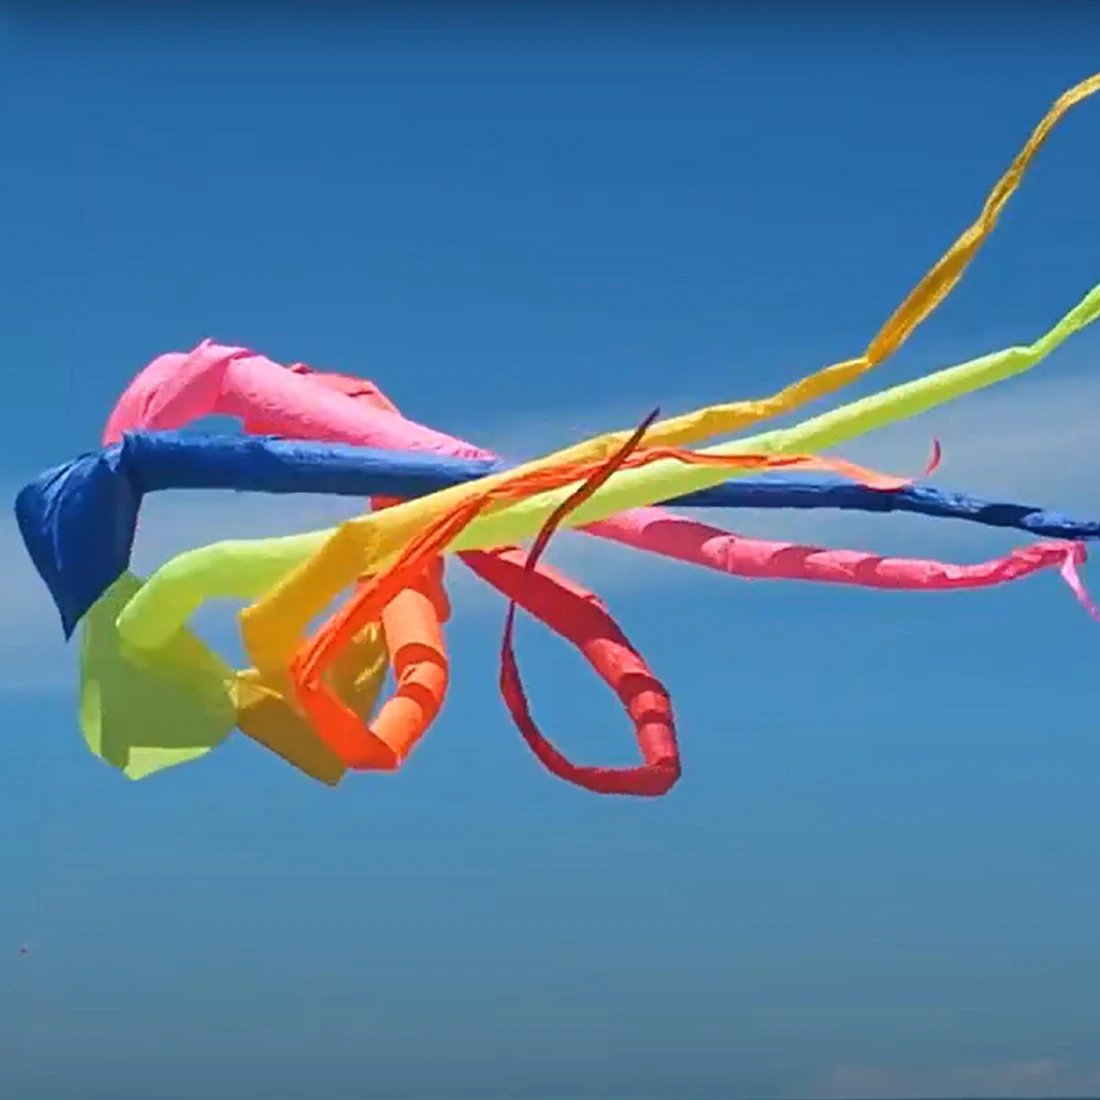 9KM 6.5m Spinner Kite Tails Line laundry 30D Ripstop Nylon with Bag for Kite Festival (Accept wholesale)